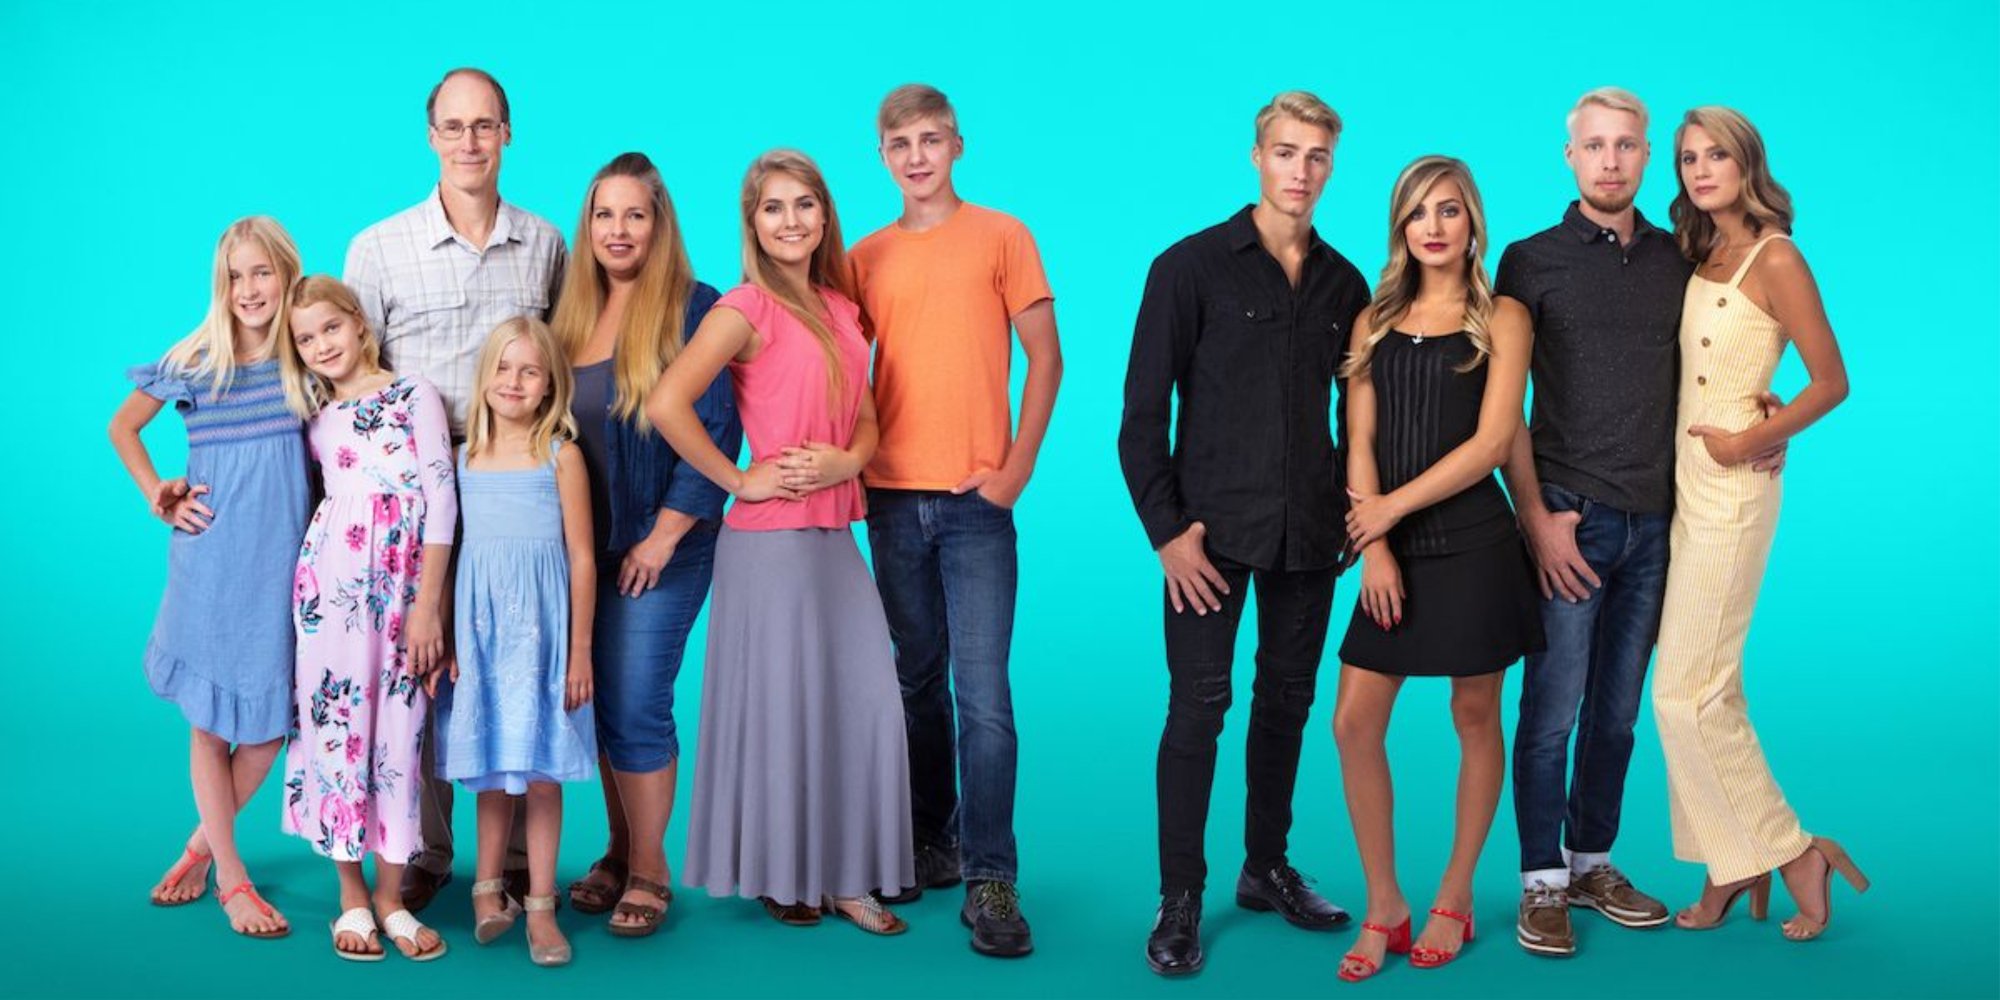 The cast of TLC's 'Welcome to Plathville' includes the entire Plath family.